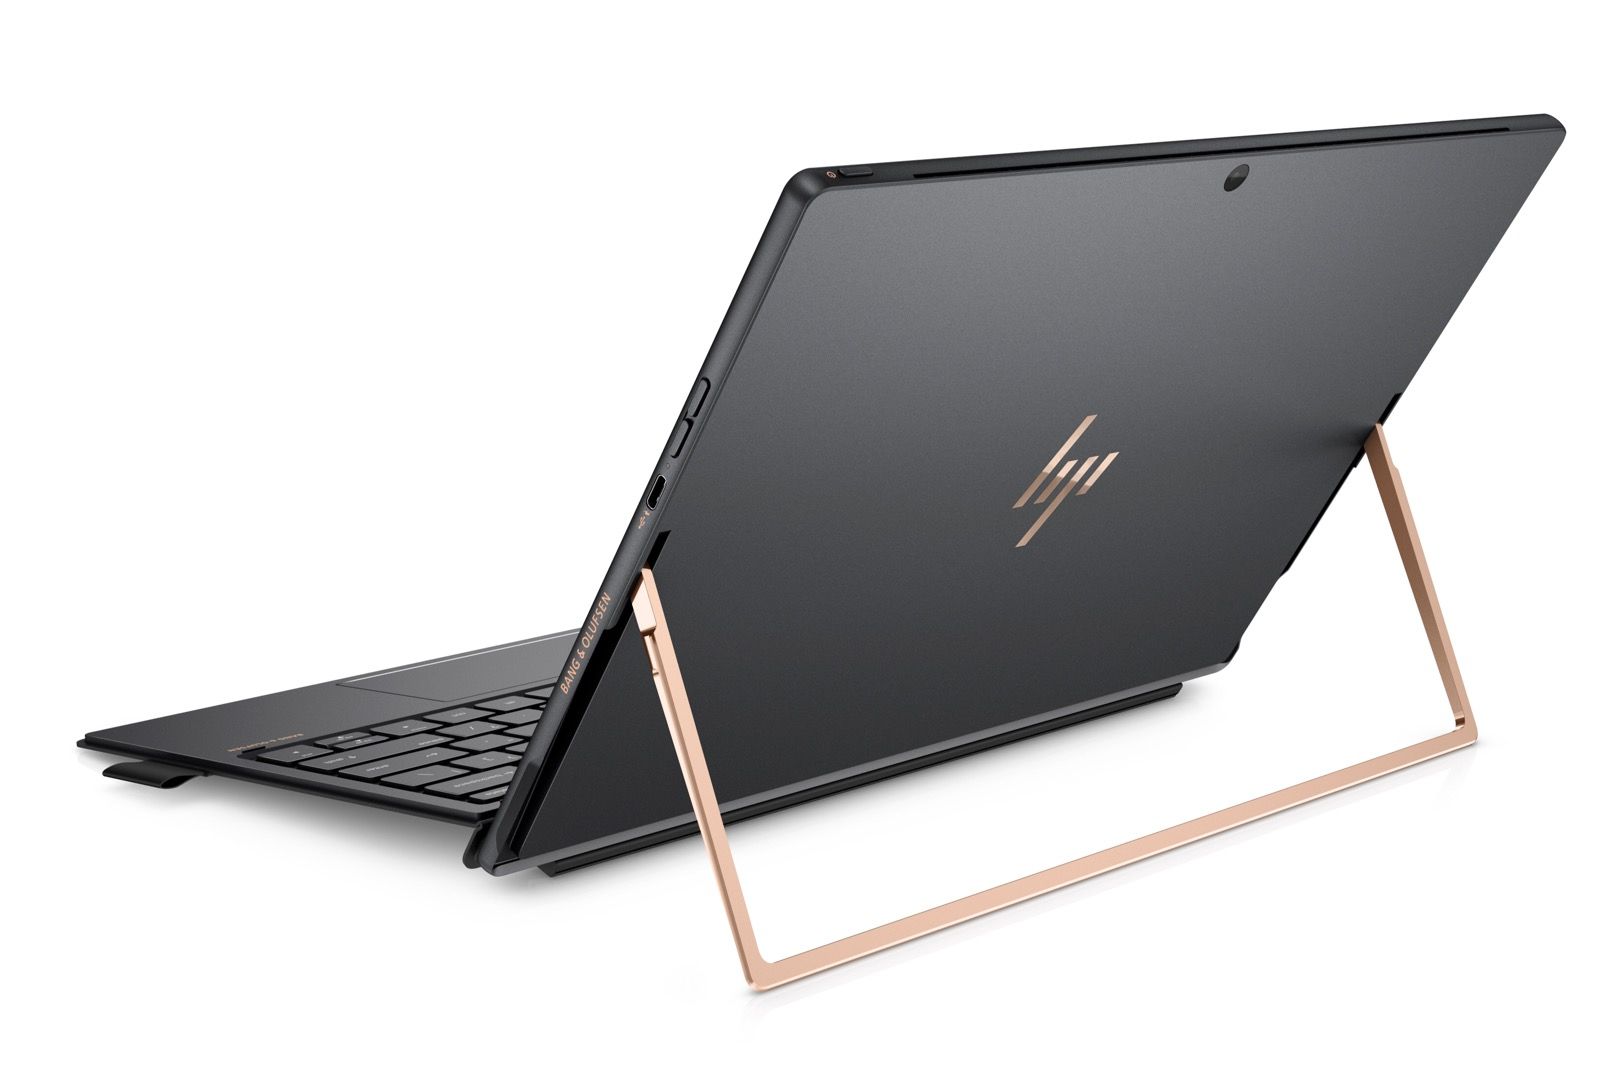 the refreshed hp spectre x2 2 in 1 is more powerful than ever image 2